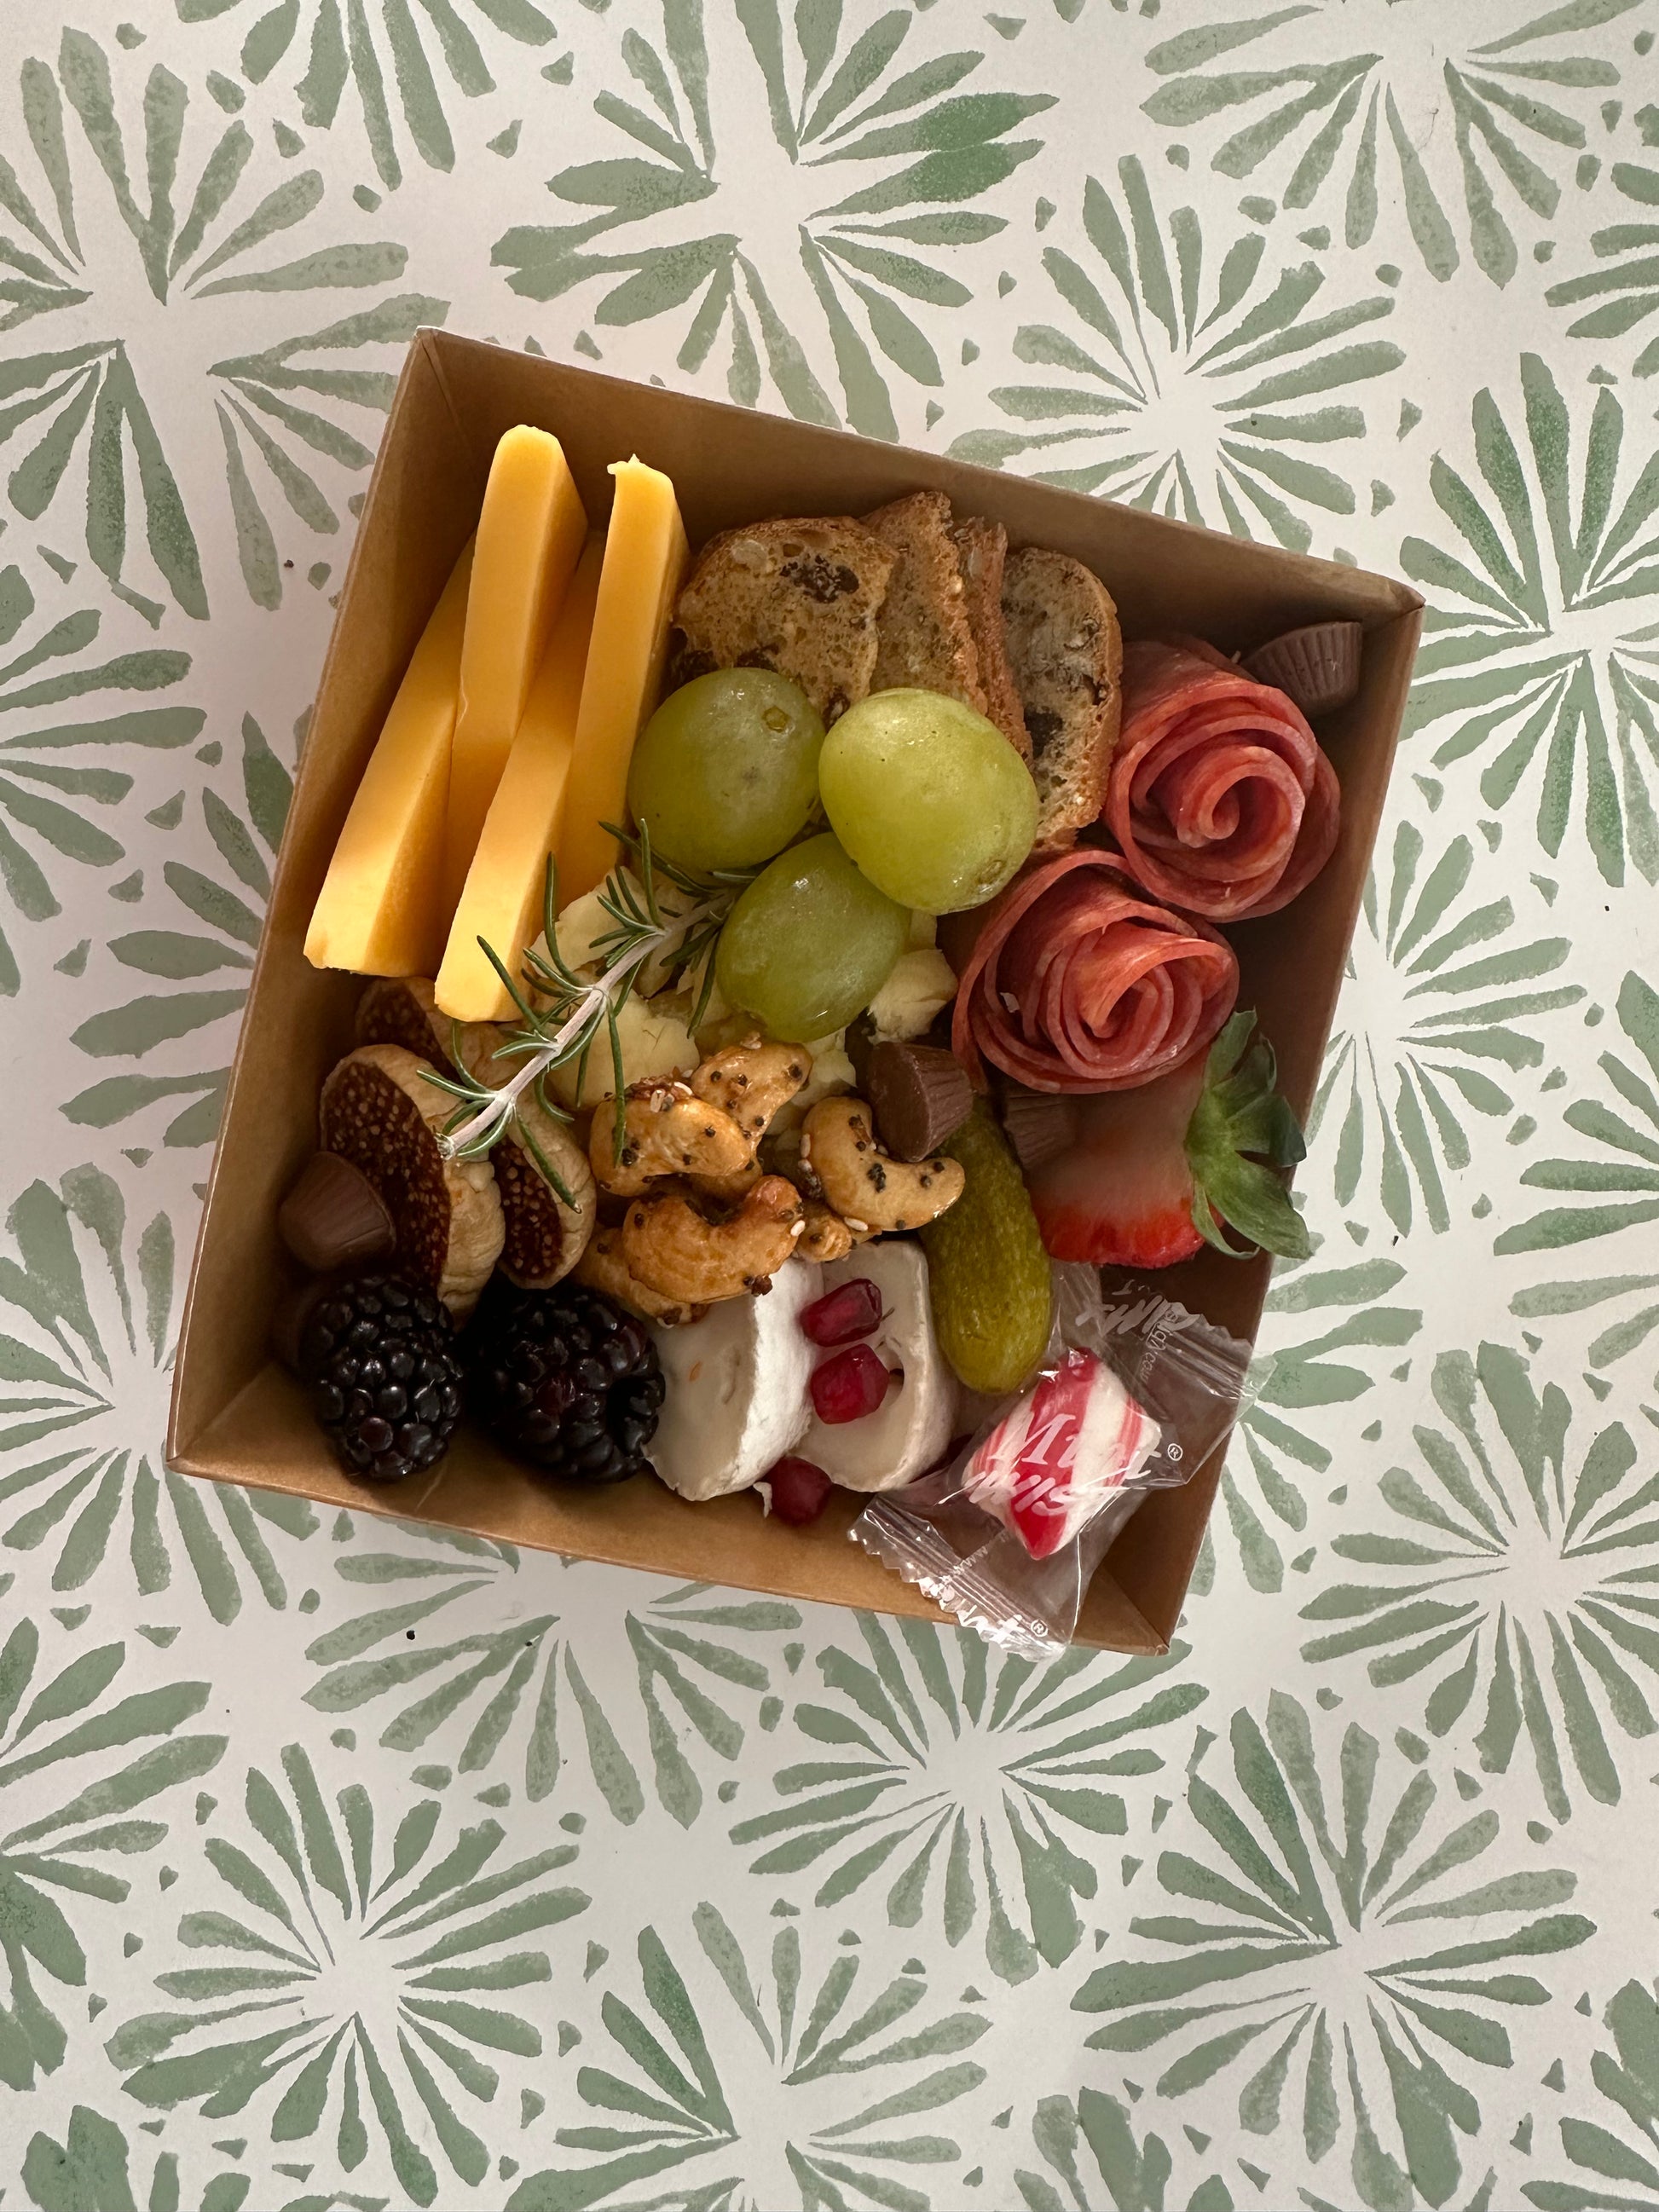 I made a Charcu-To-Go/Snackle Box for a bachelorette party this weekend.  (Total is 5x what's pictured here.) : r/CharcuterieBoard